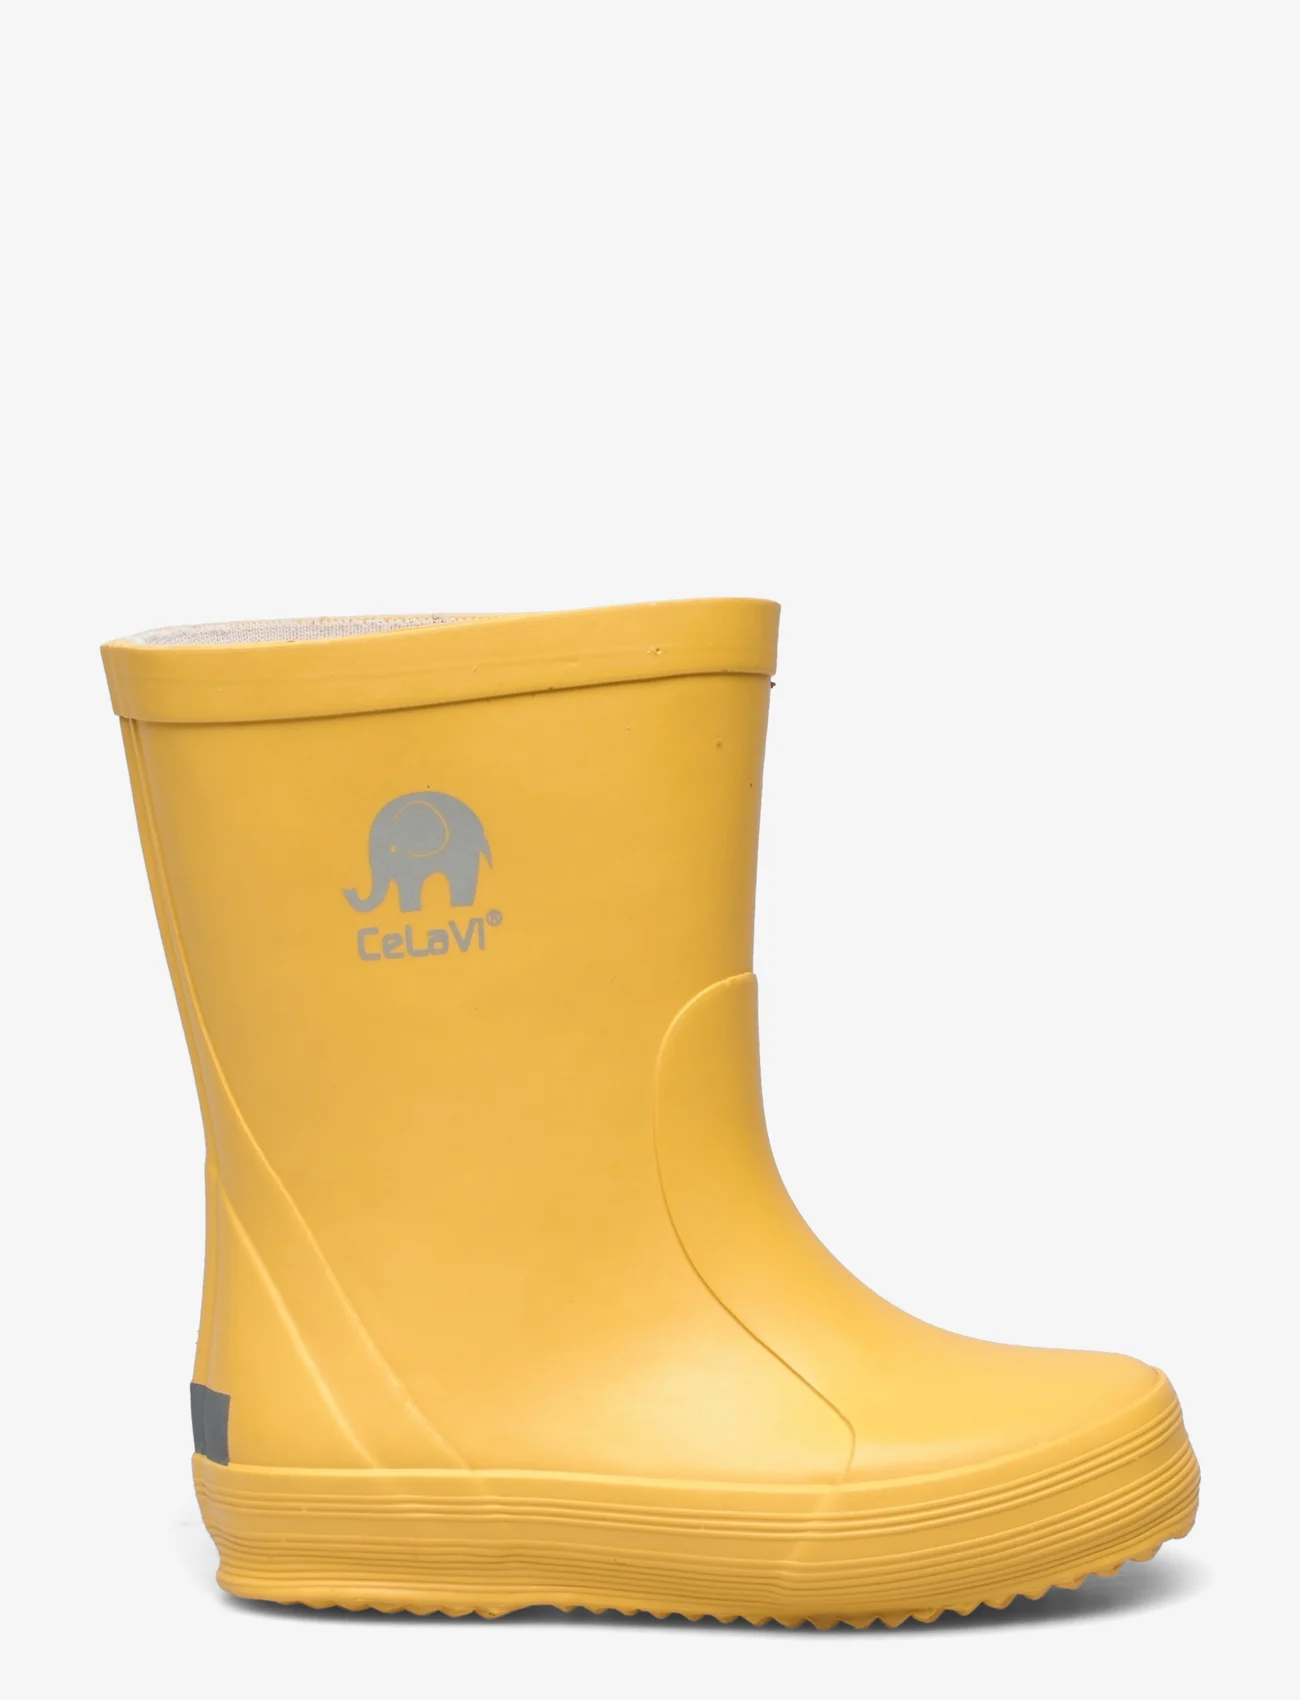 CeLaVi - Basic wellies -solid - unlined rubberboots - mineral yellow - 1